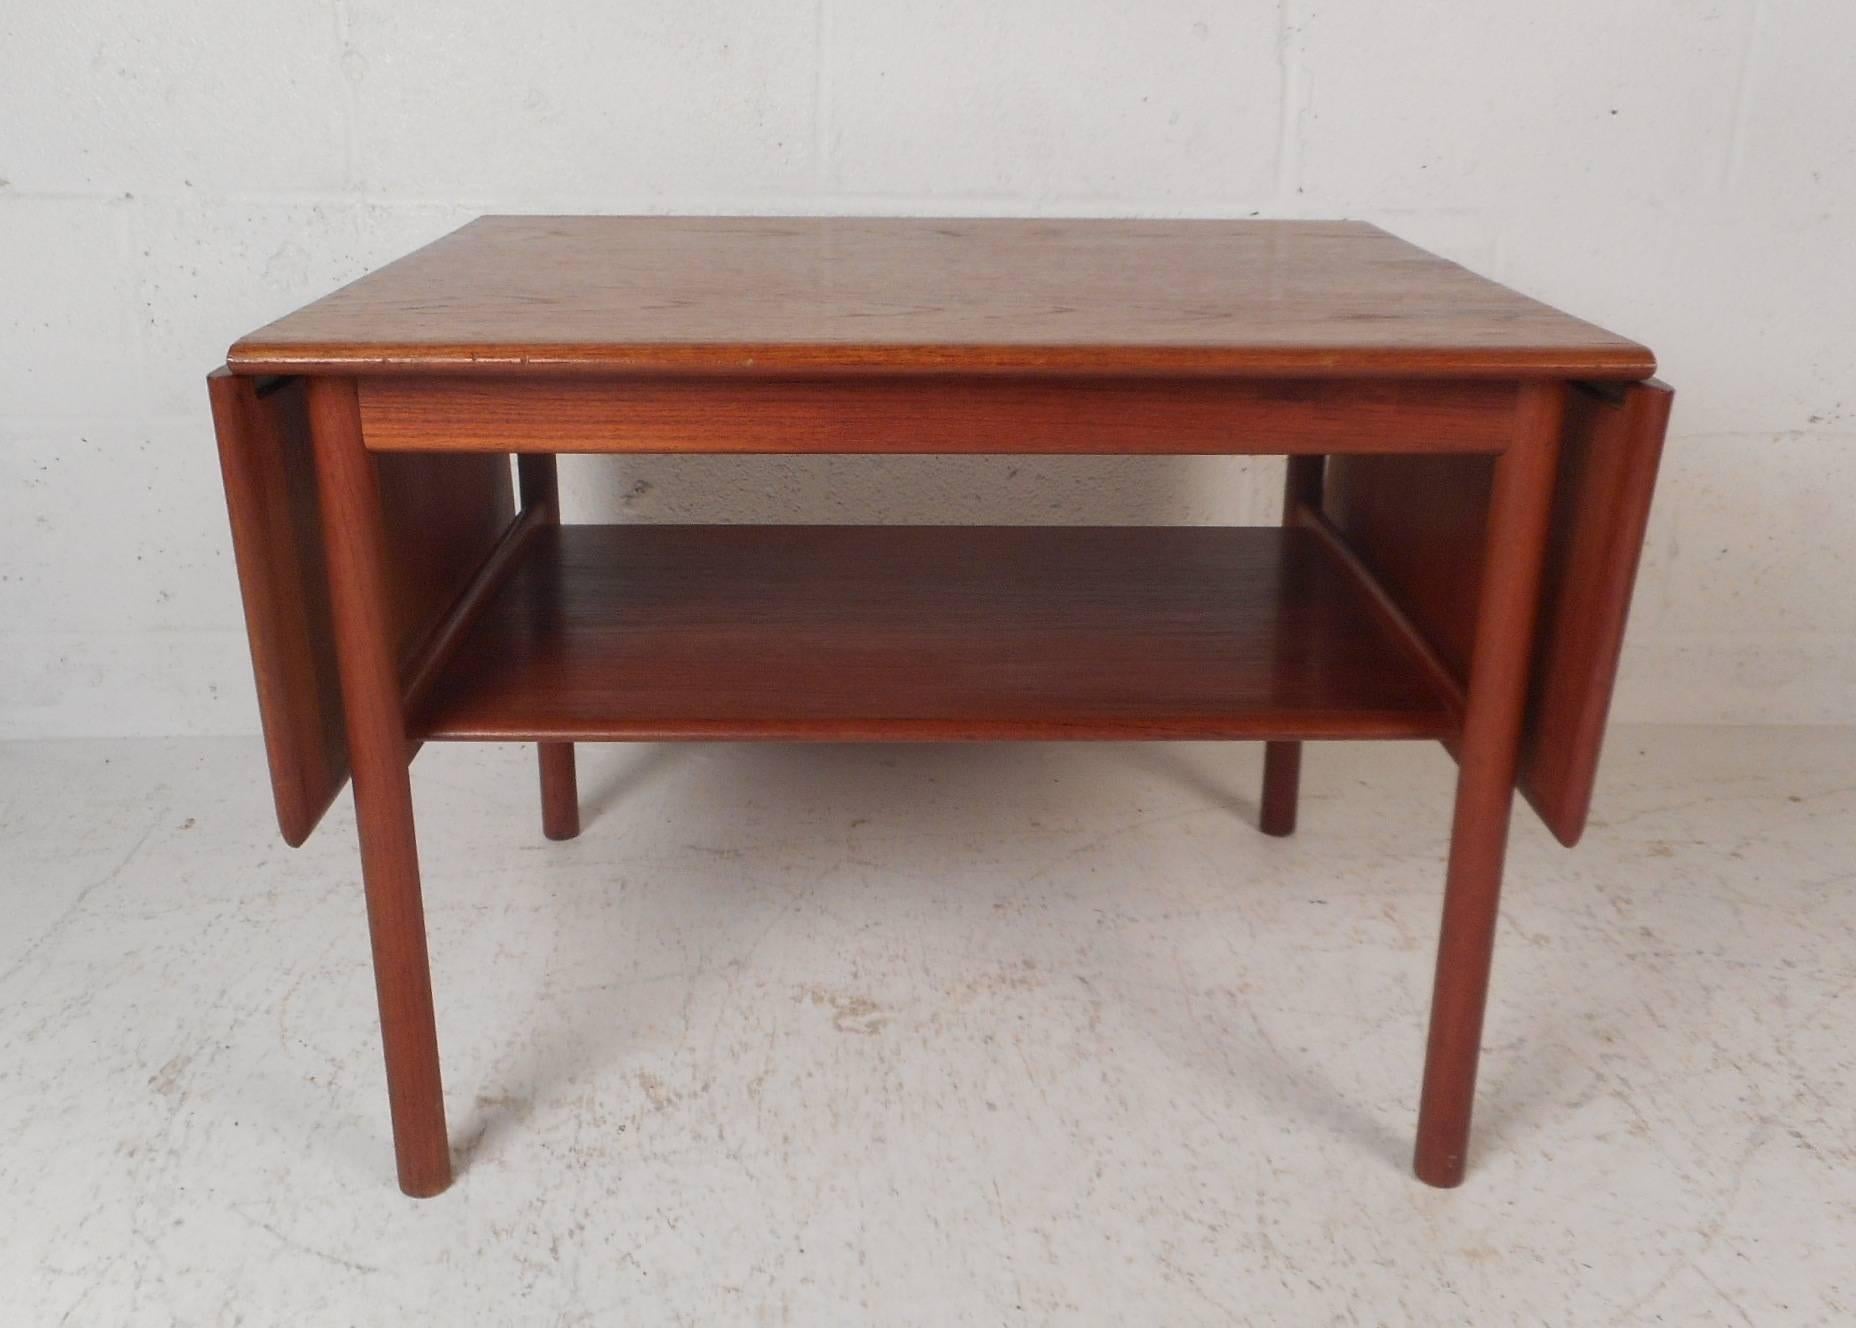 This stunning vintage modern coffee table features a drop-leaf design extending the width all the way to 48 inches. The perfect space saving table with a lower shelf for additional storage and an elegant teak wood grain throughout. This unique